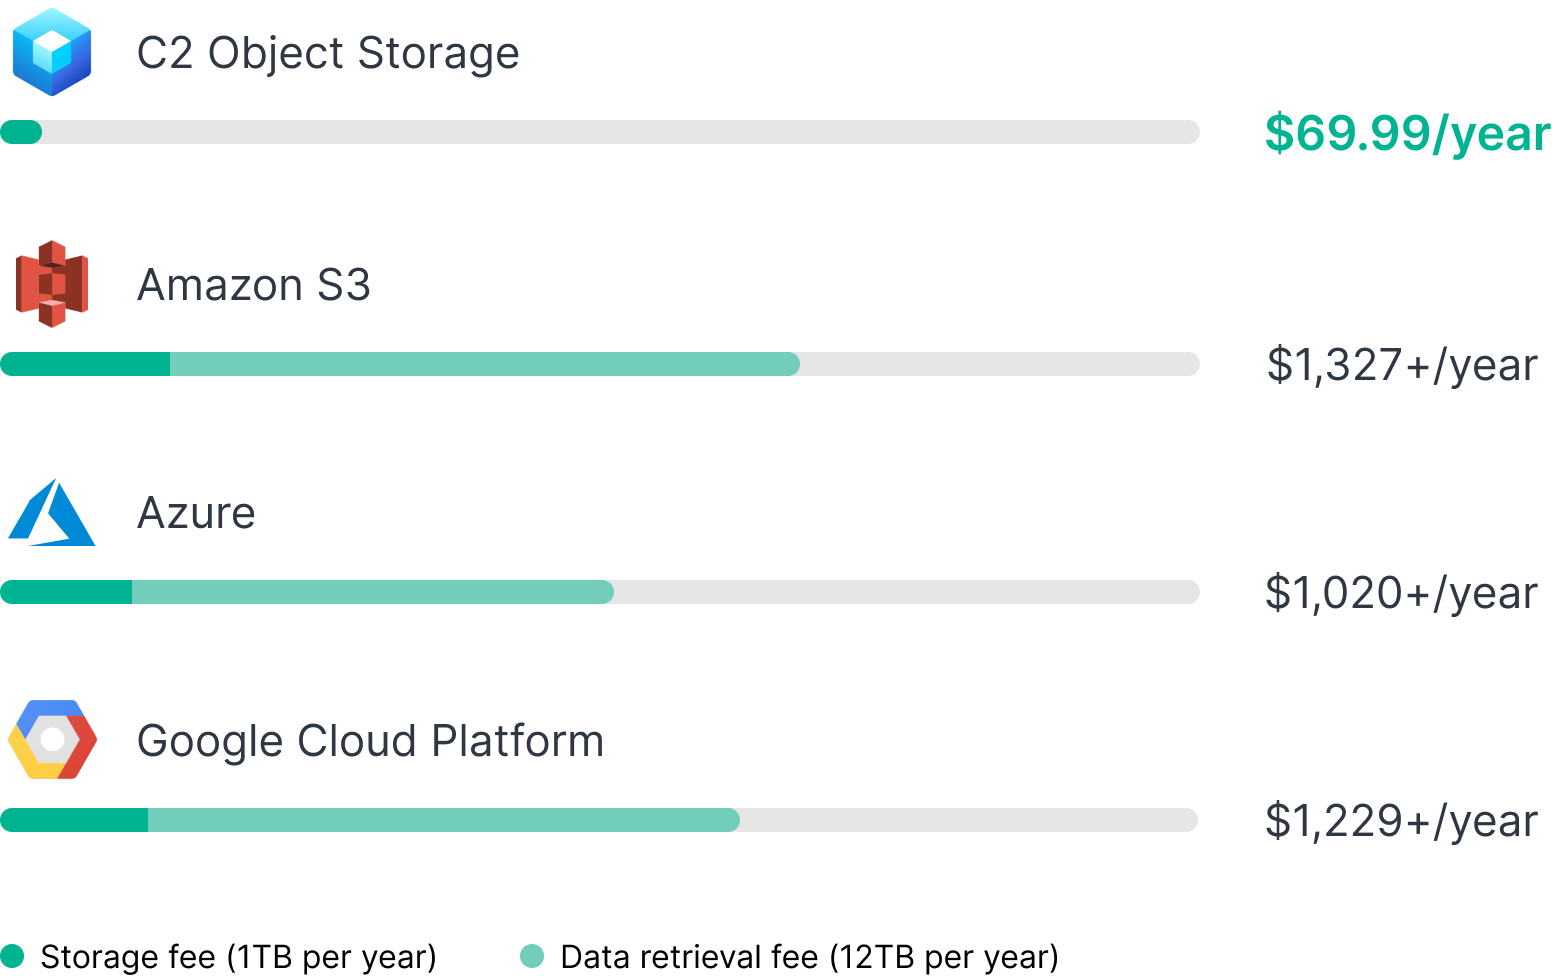 Image from Synology of C2 Object Storage price compared to hyperscalers